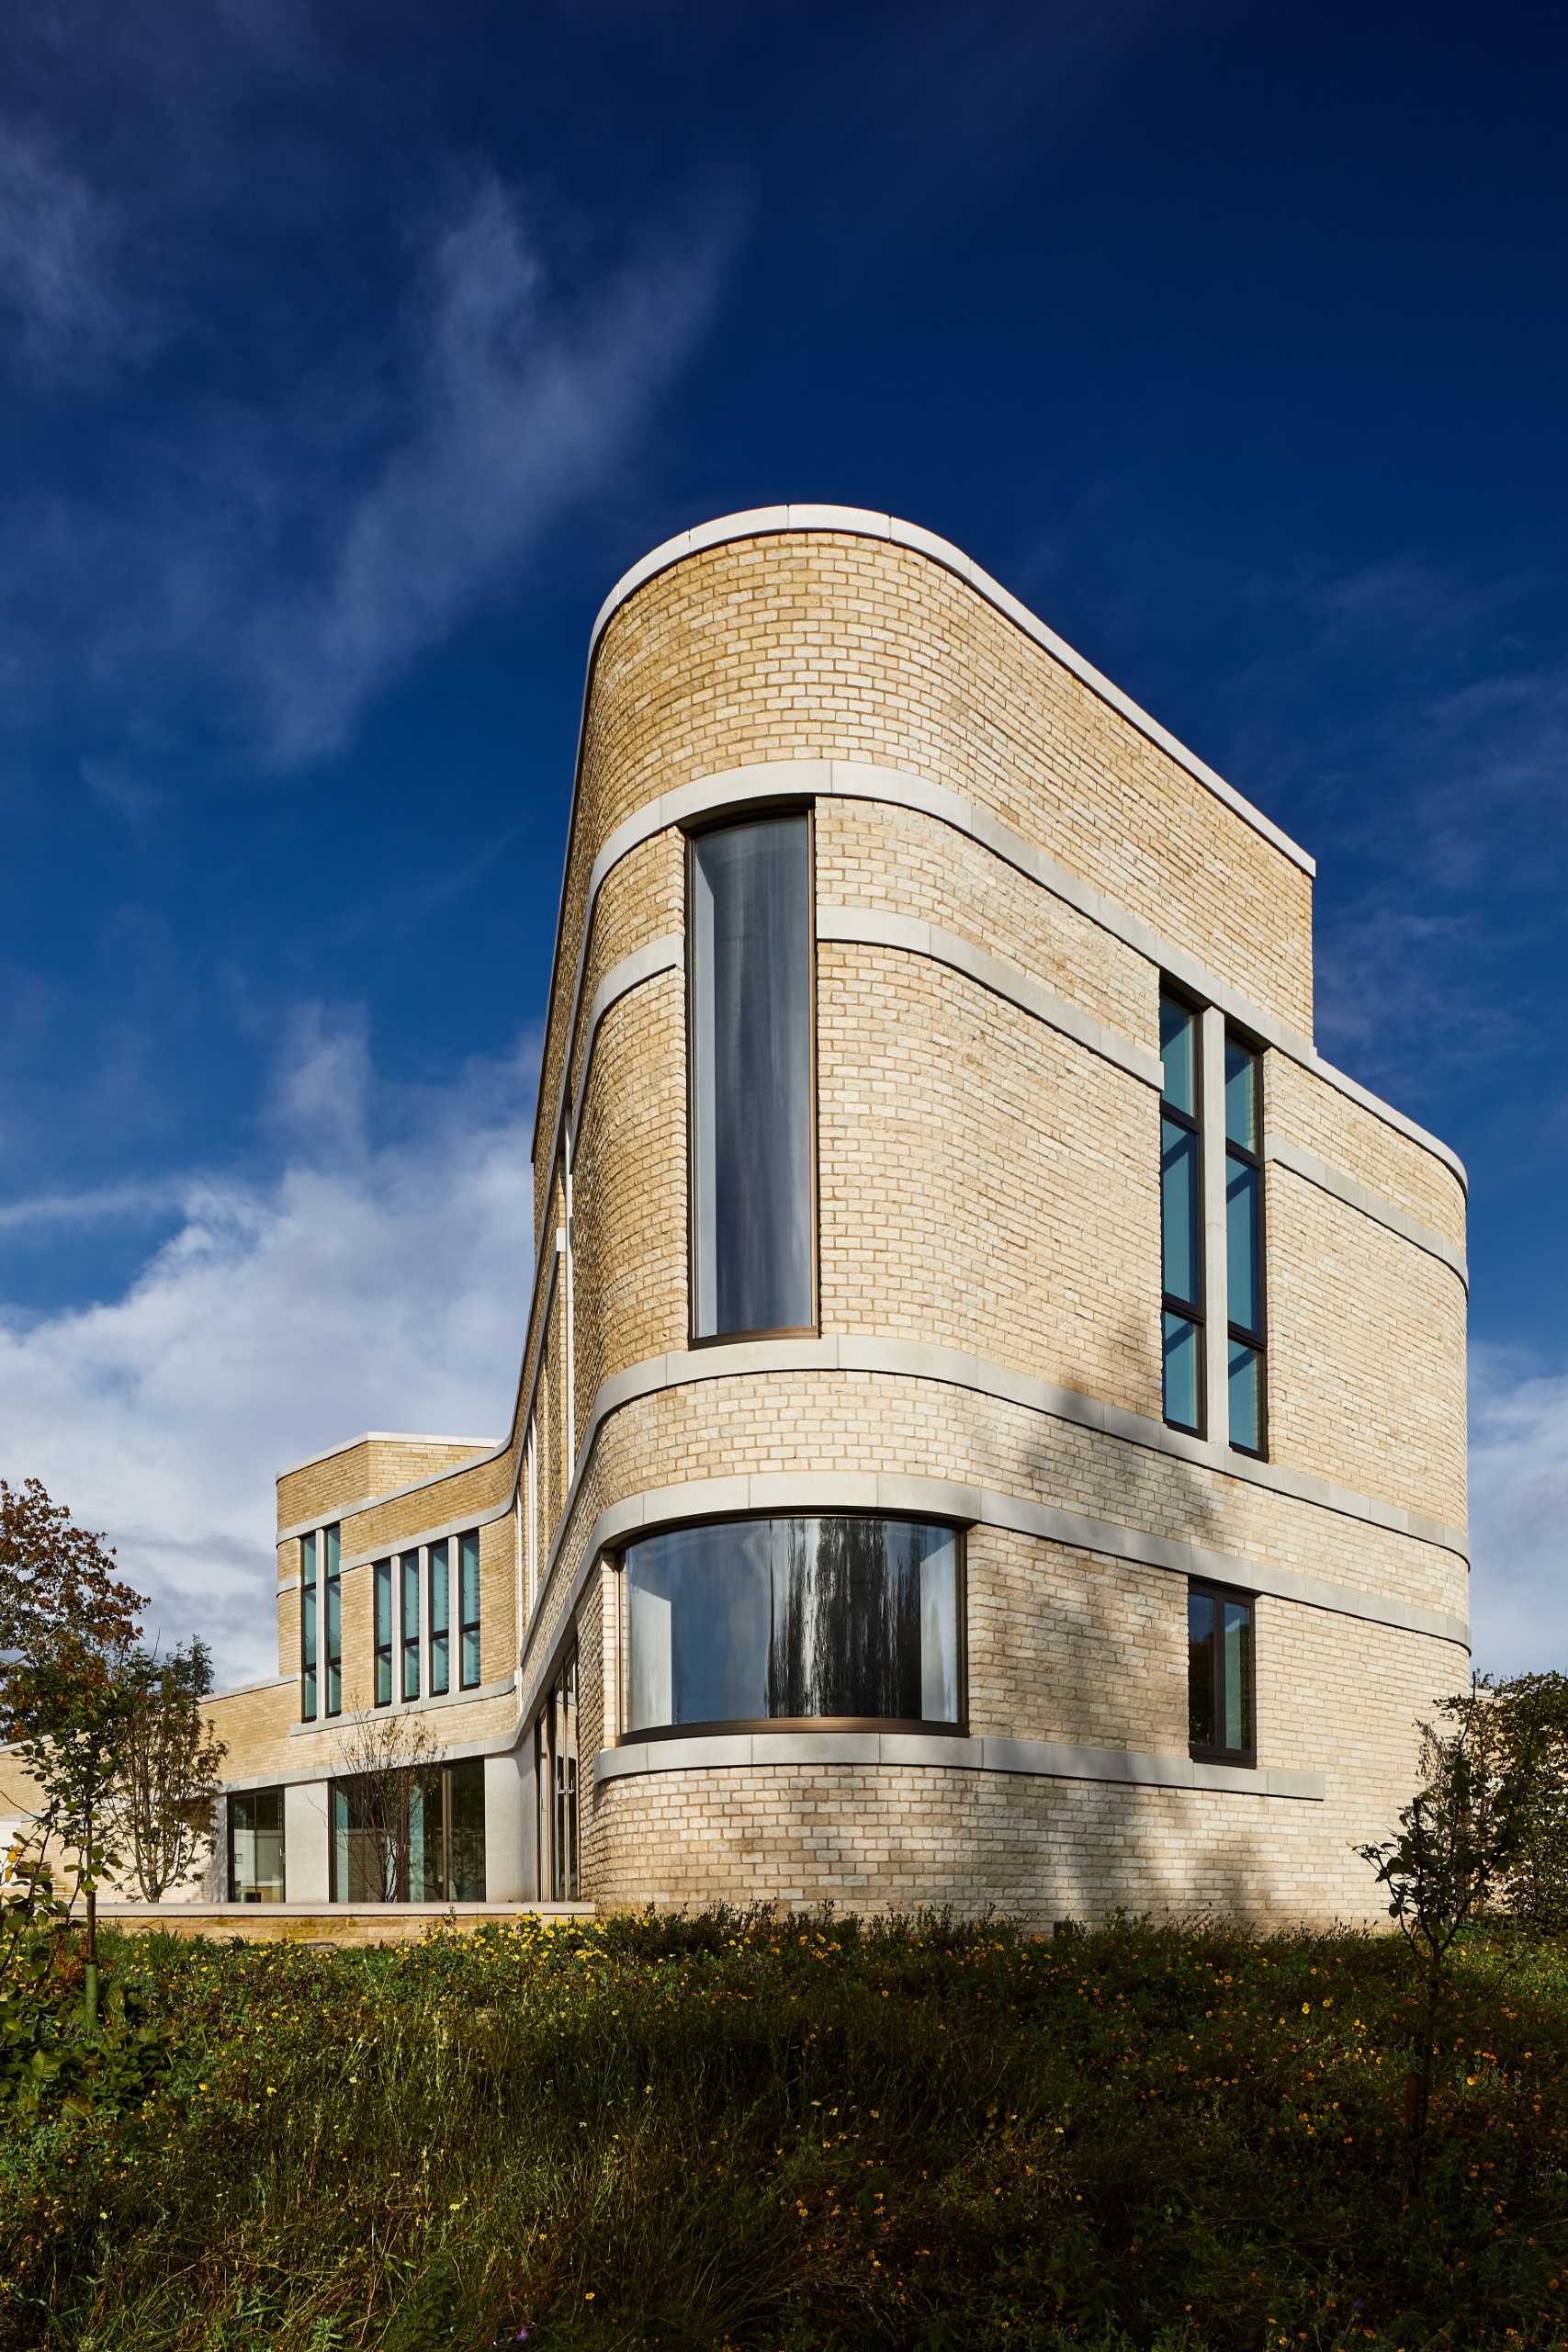 A modern stone home with ribbons of cast Portland stone snaking around the curved exterior.